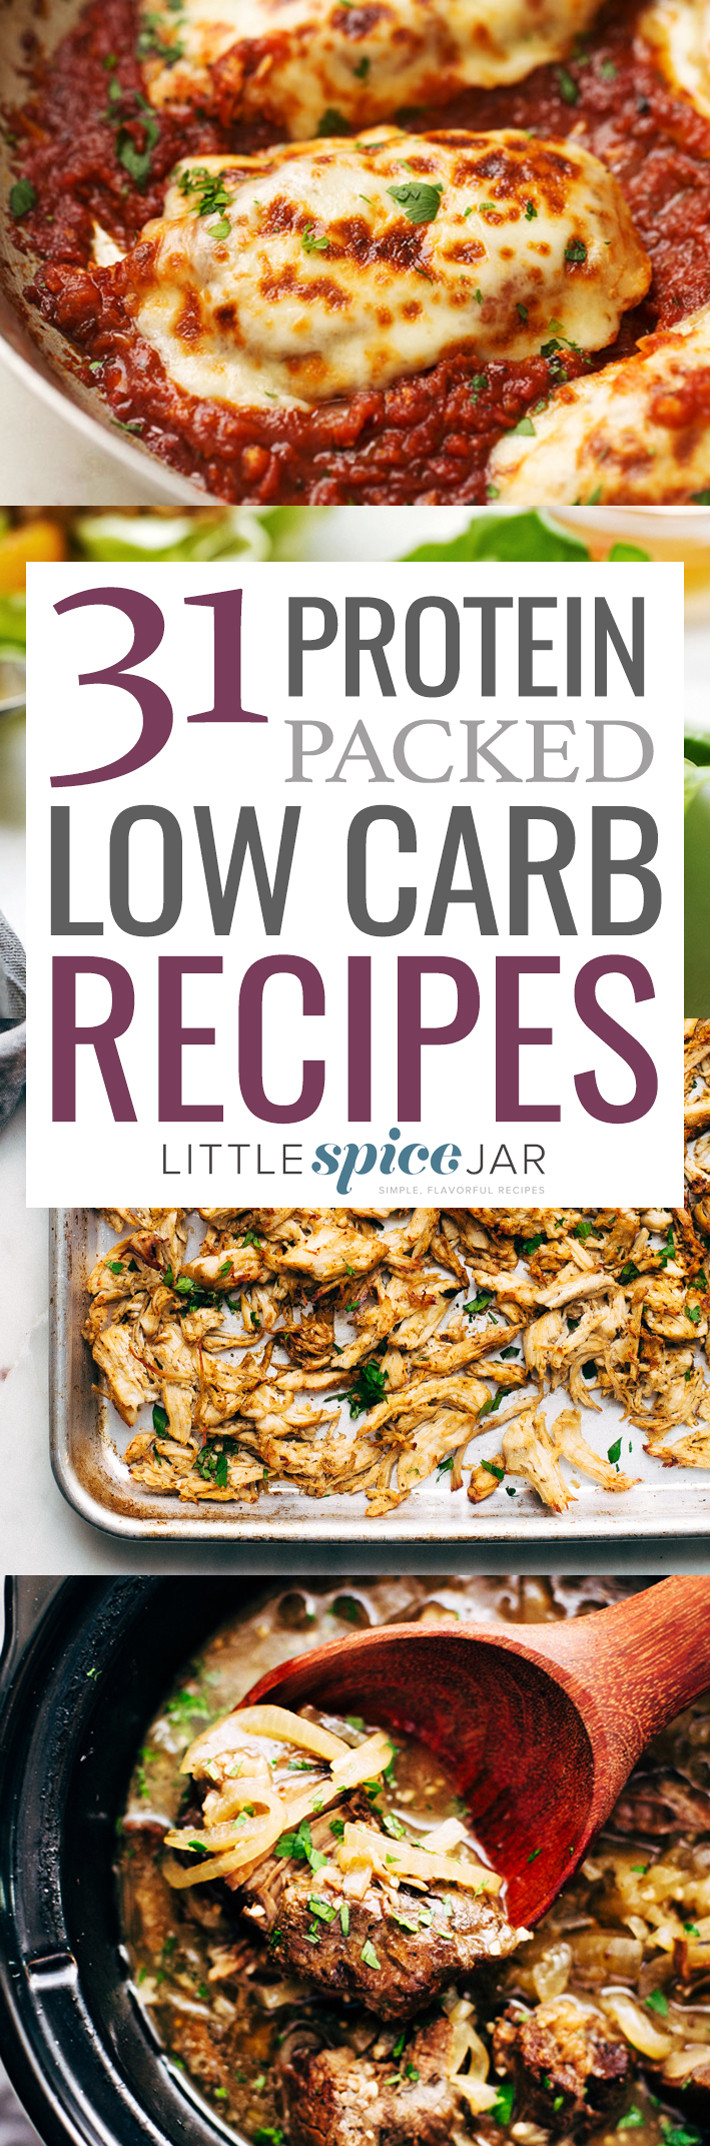 Low Calorie Low Carb Recipes
 31 Protein Packed Low Carb Recipes